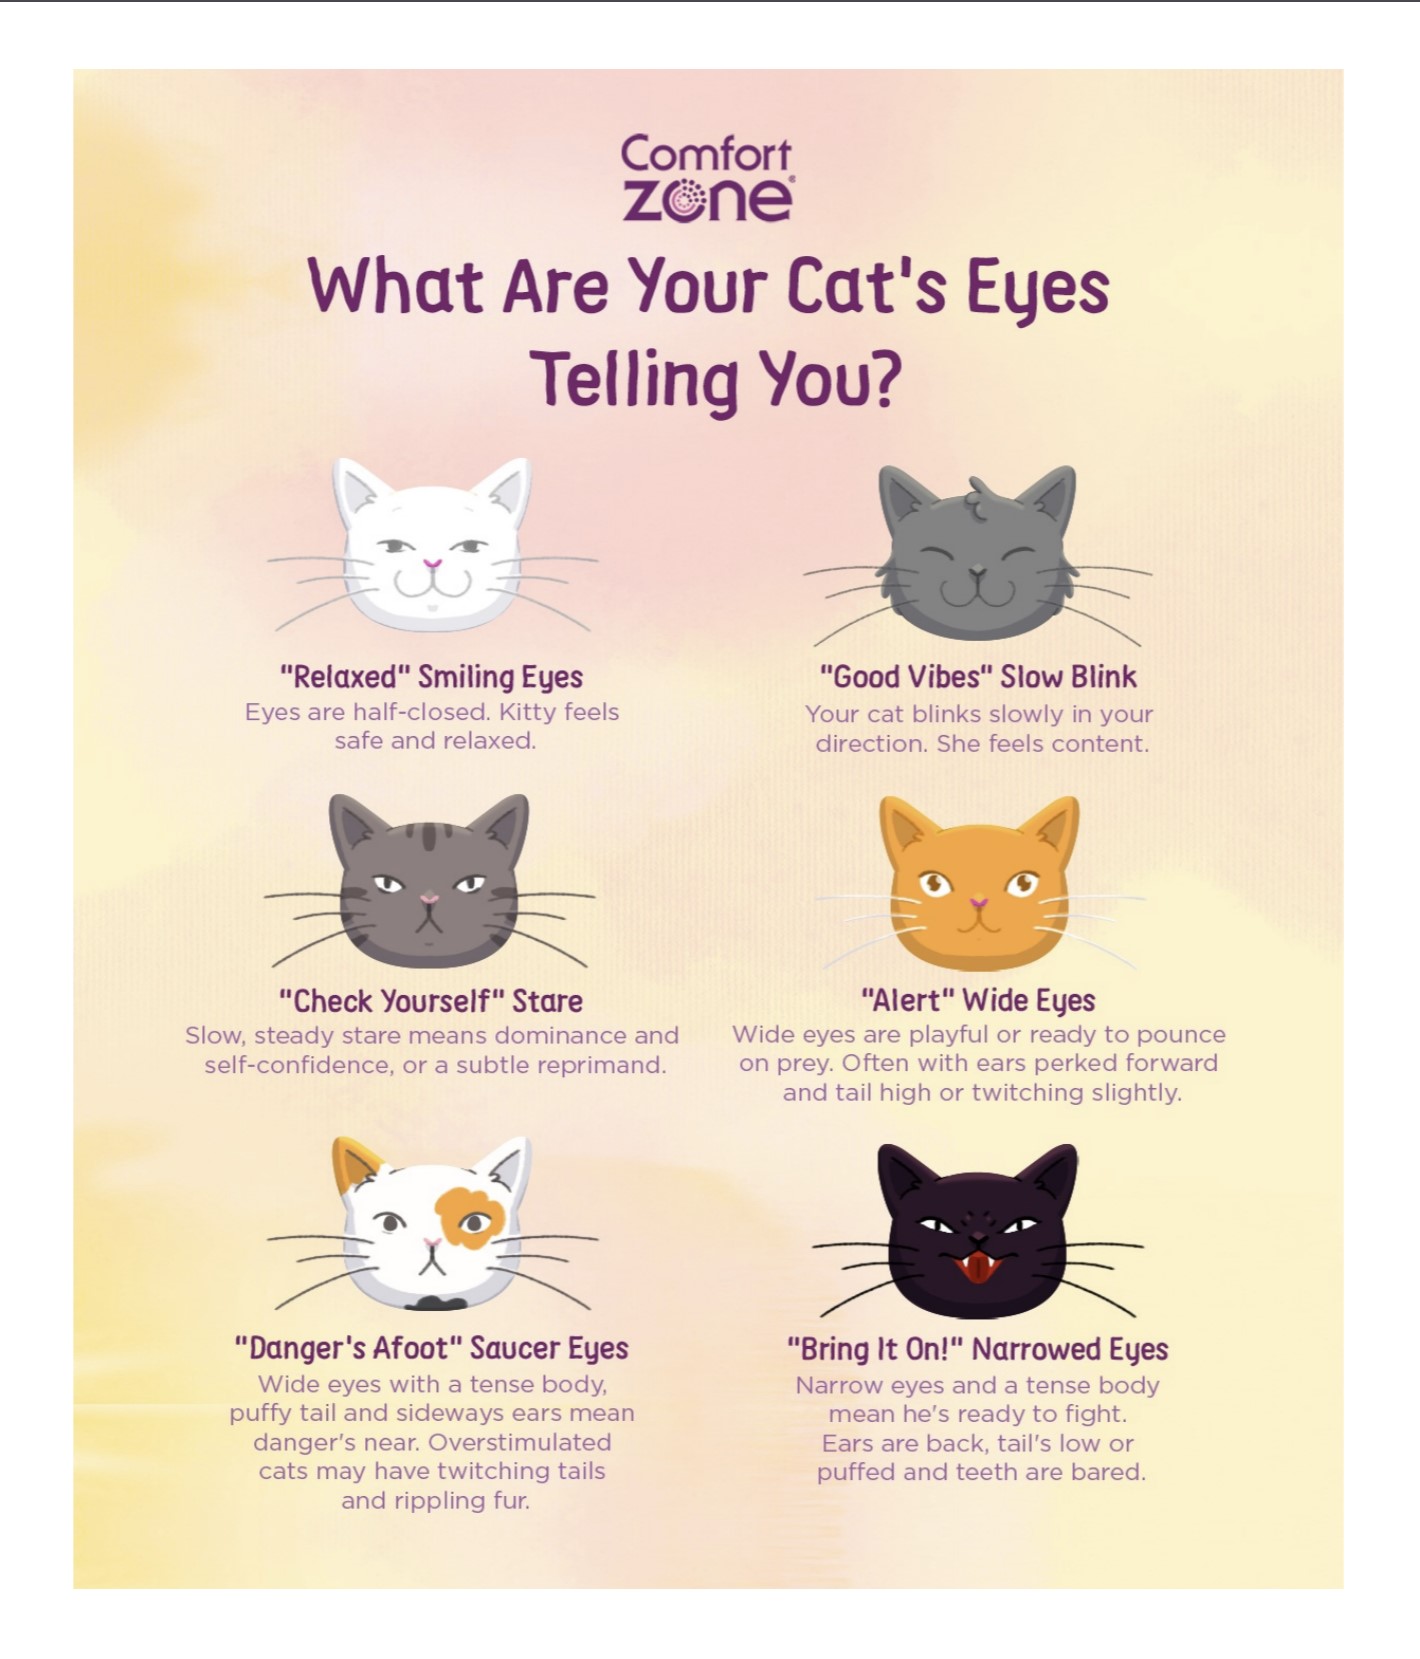 Learn the meaning behind your cat's eyes.